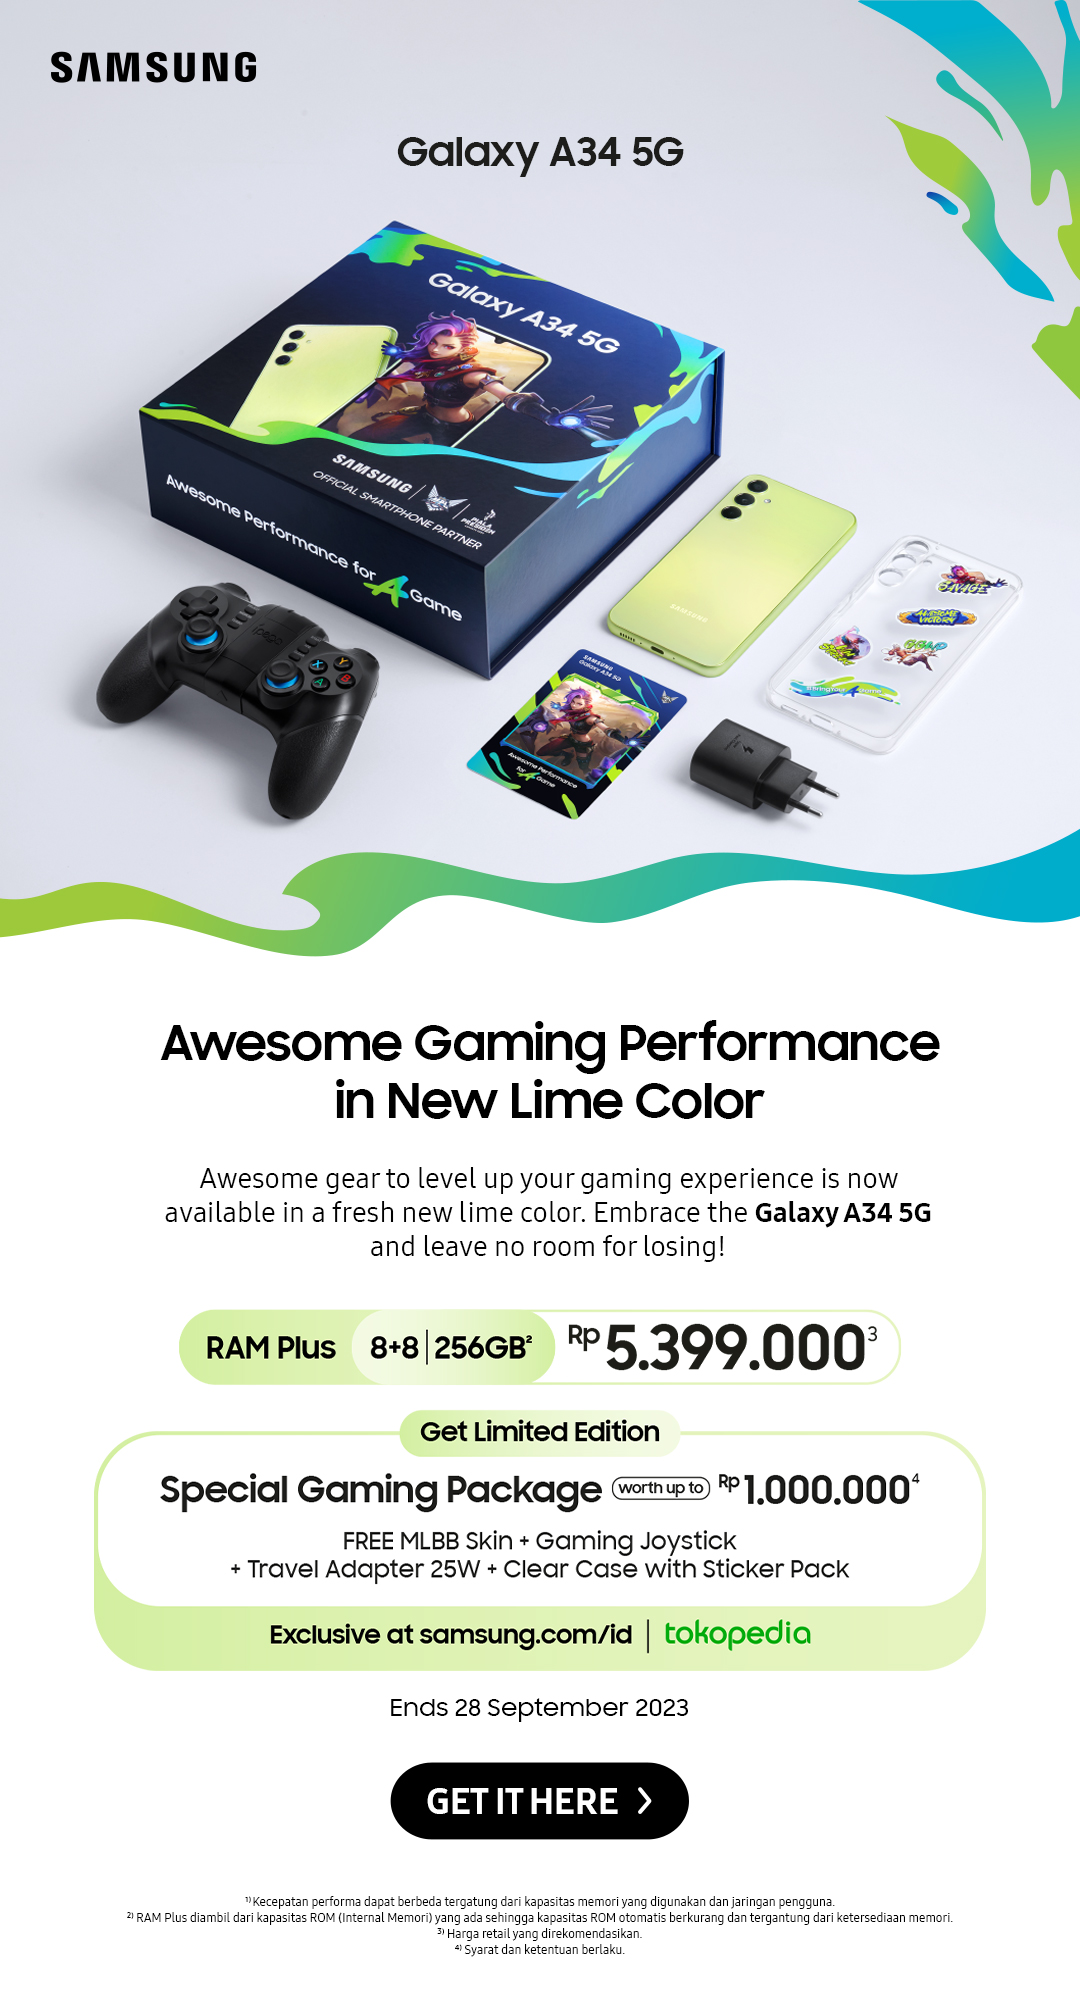 Awesome Gaming Performance in New Lime Color | Awesome gear to level up your gaming experience is now available in a fresh new lime color. Embrace the Galaxy A34 5G and leave no room for losing! Click here to get it now in special gaming package!